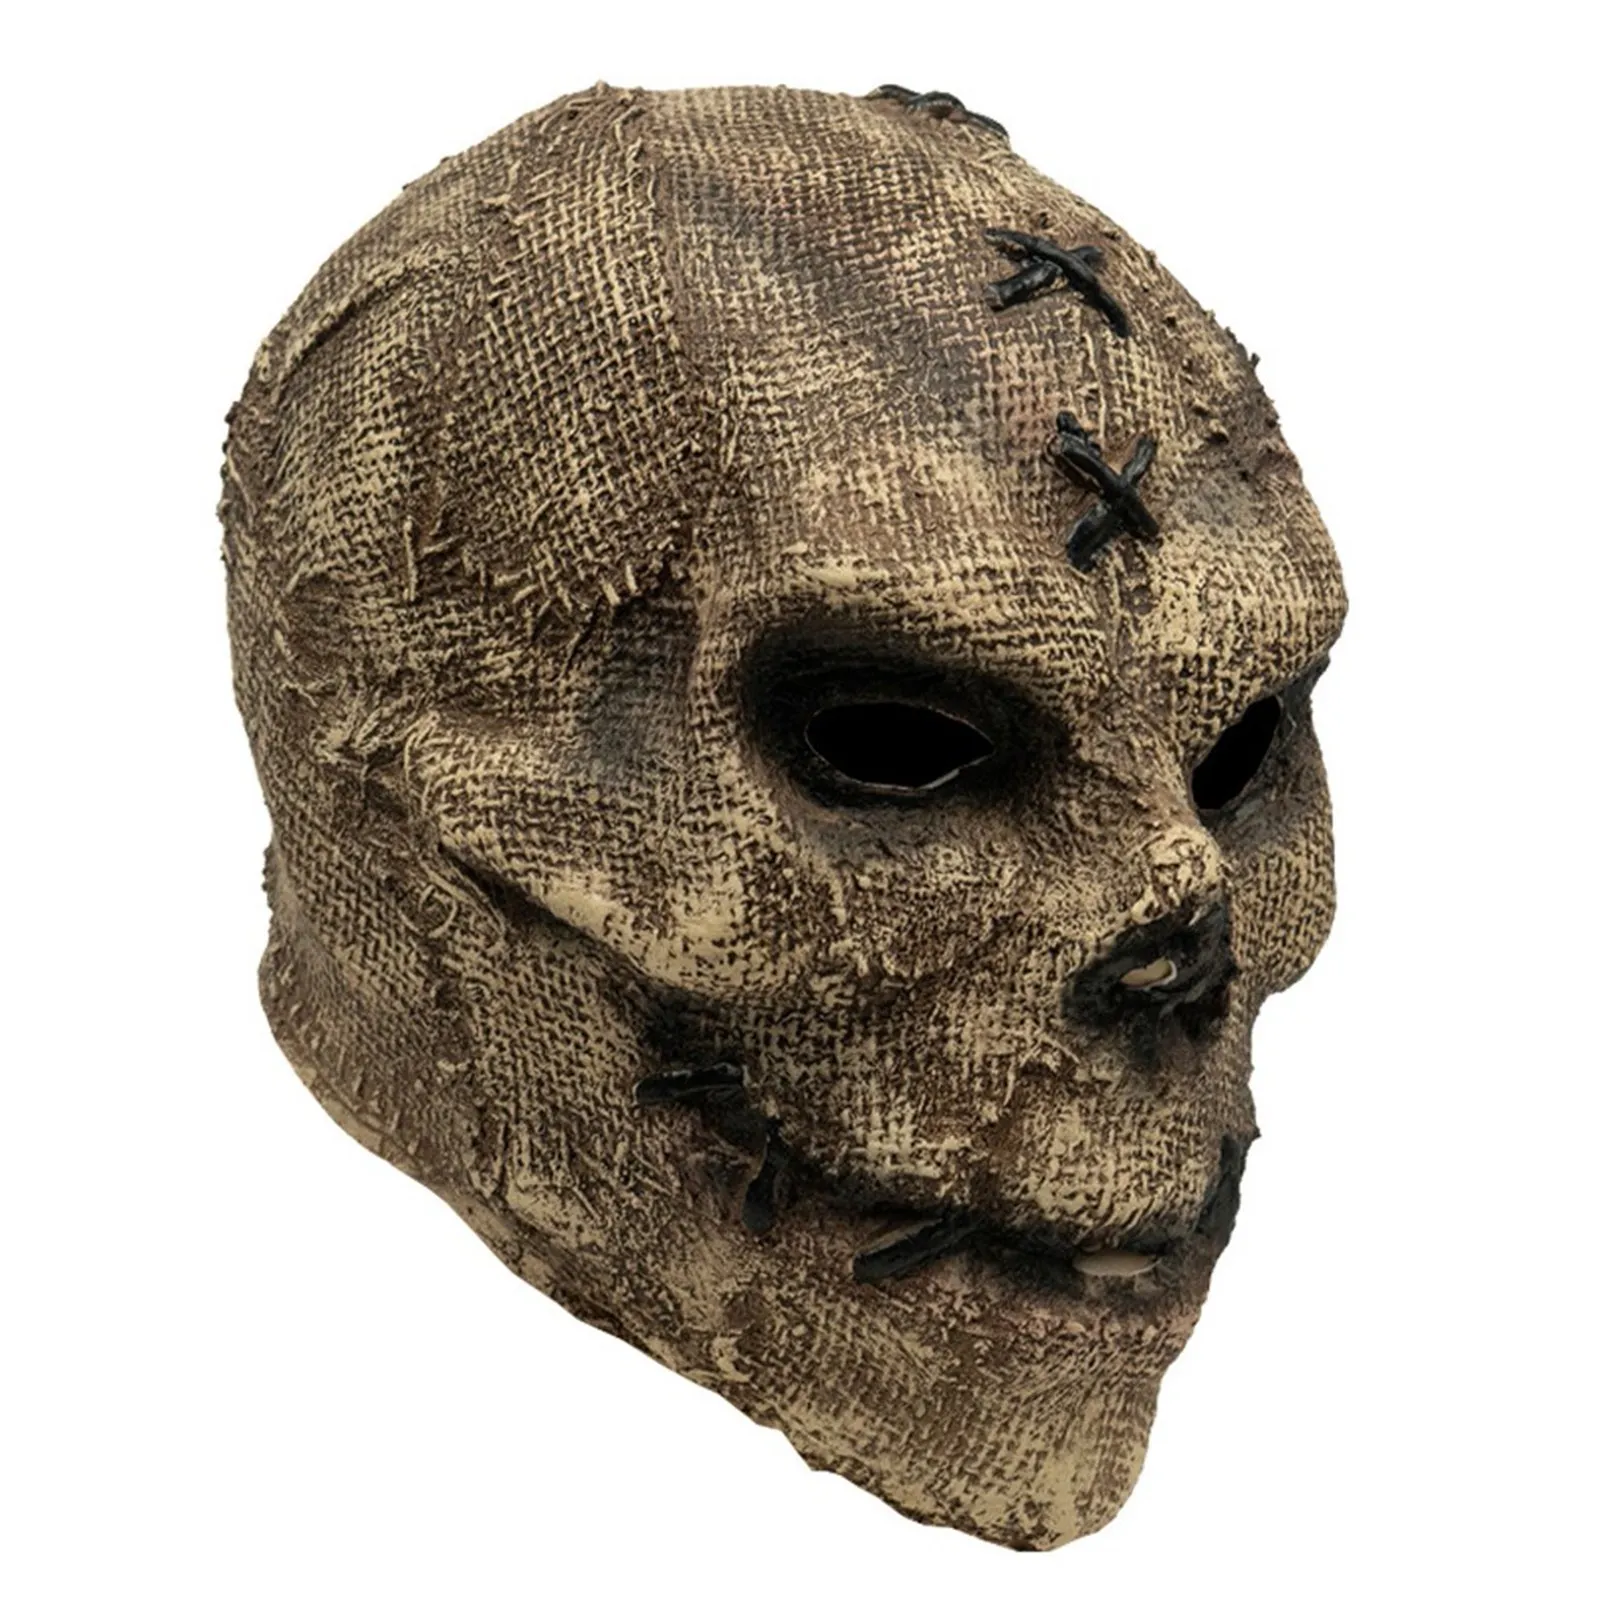 Skull Head Mask Terror Head Cover Halloween New Product Ball Party Cosplay Props